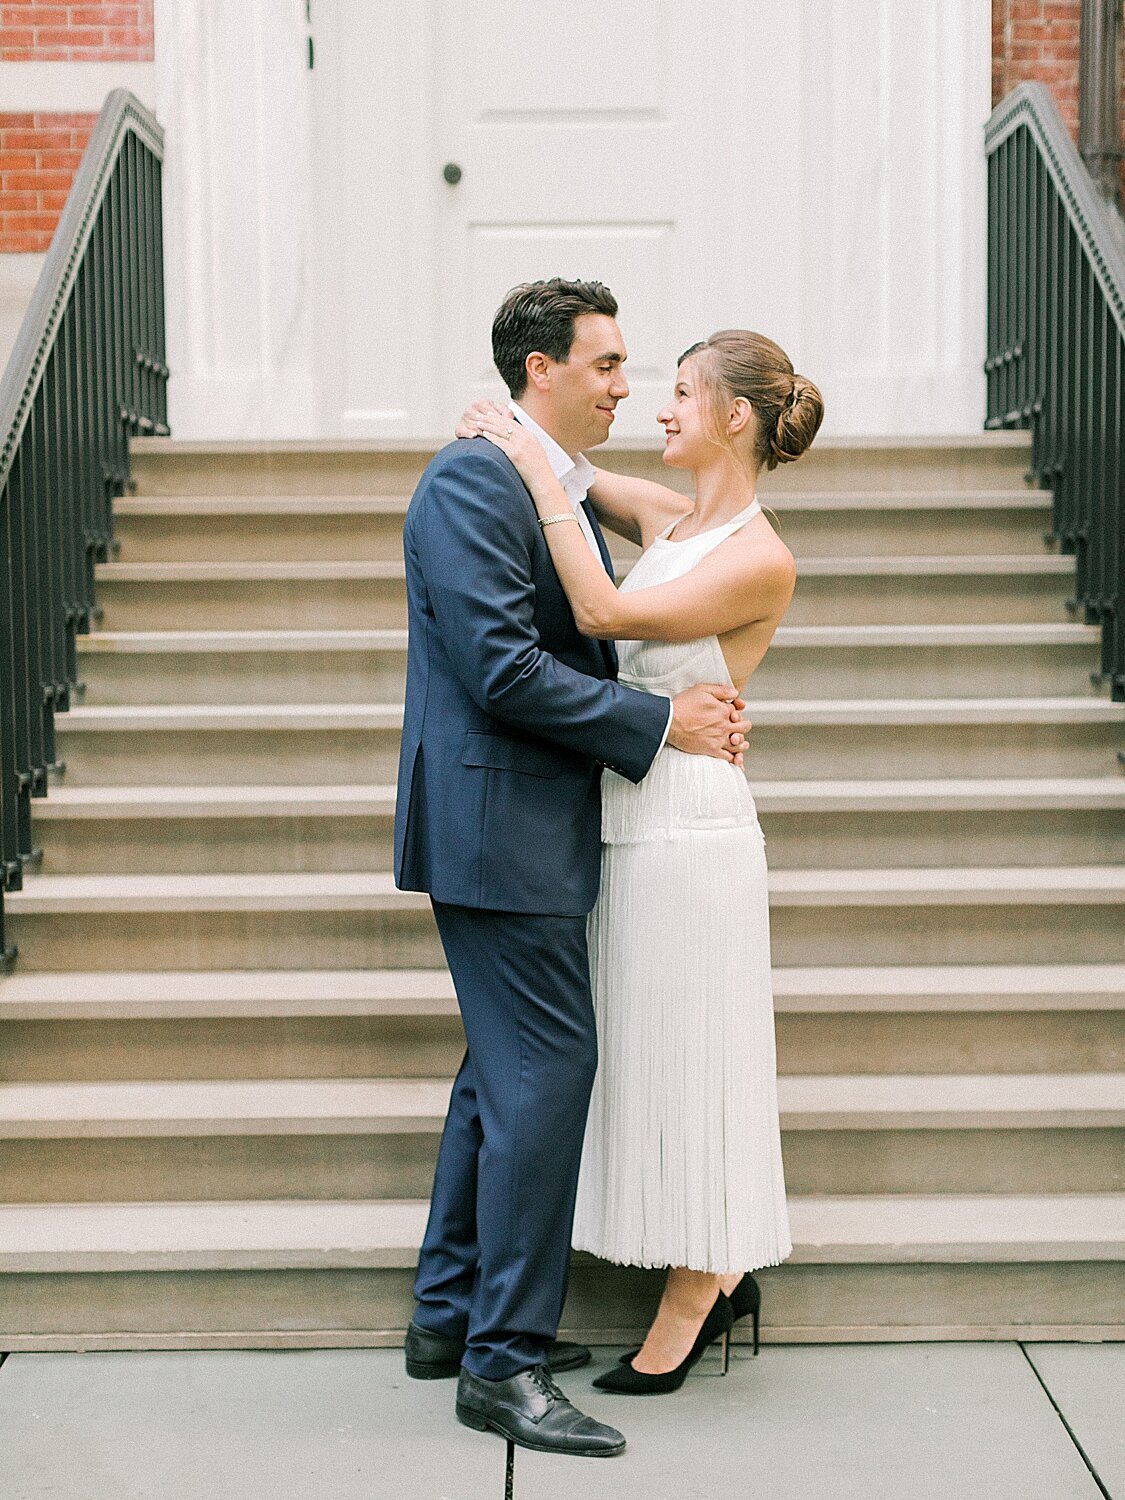 engaged couple poses by steps outside NYC home | Asher Gardner Photography | Gramercy Park Engagement Session